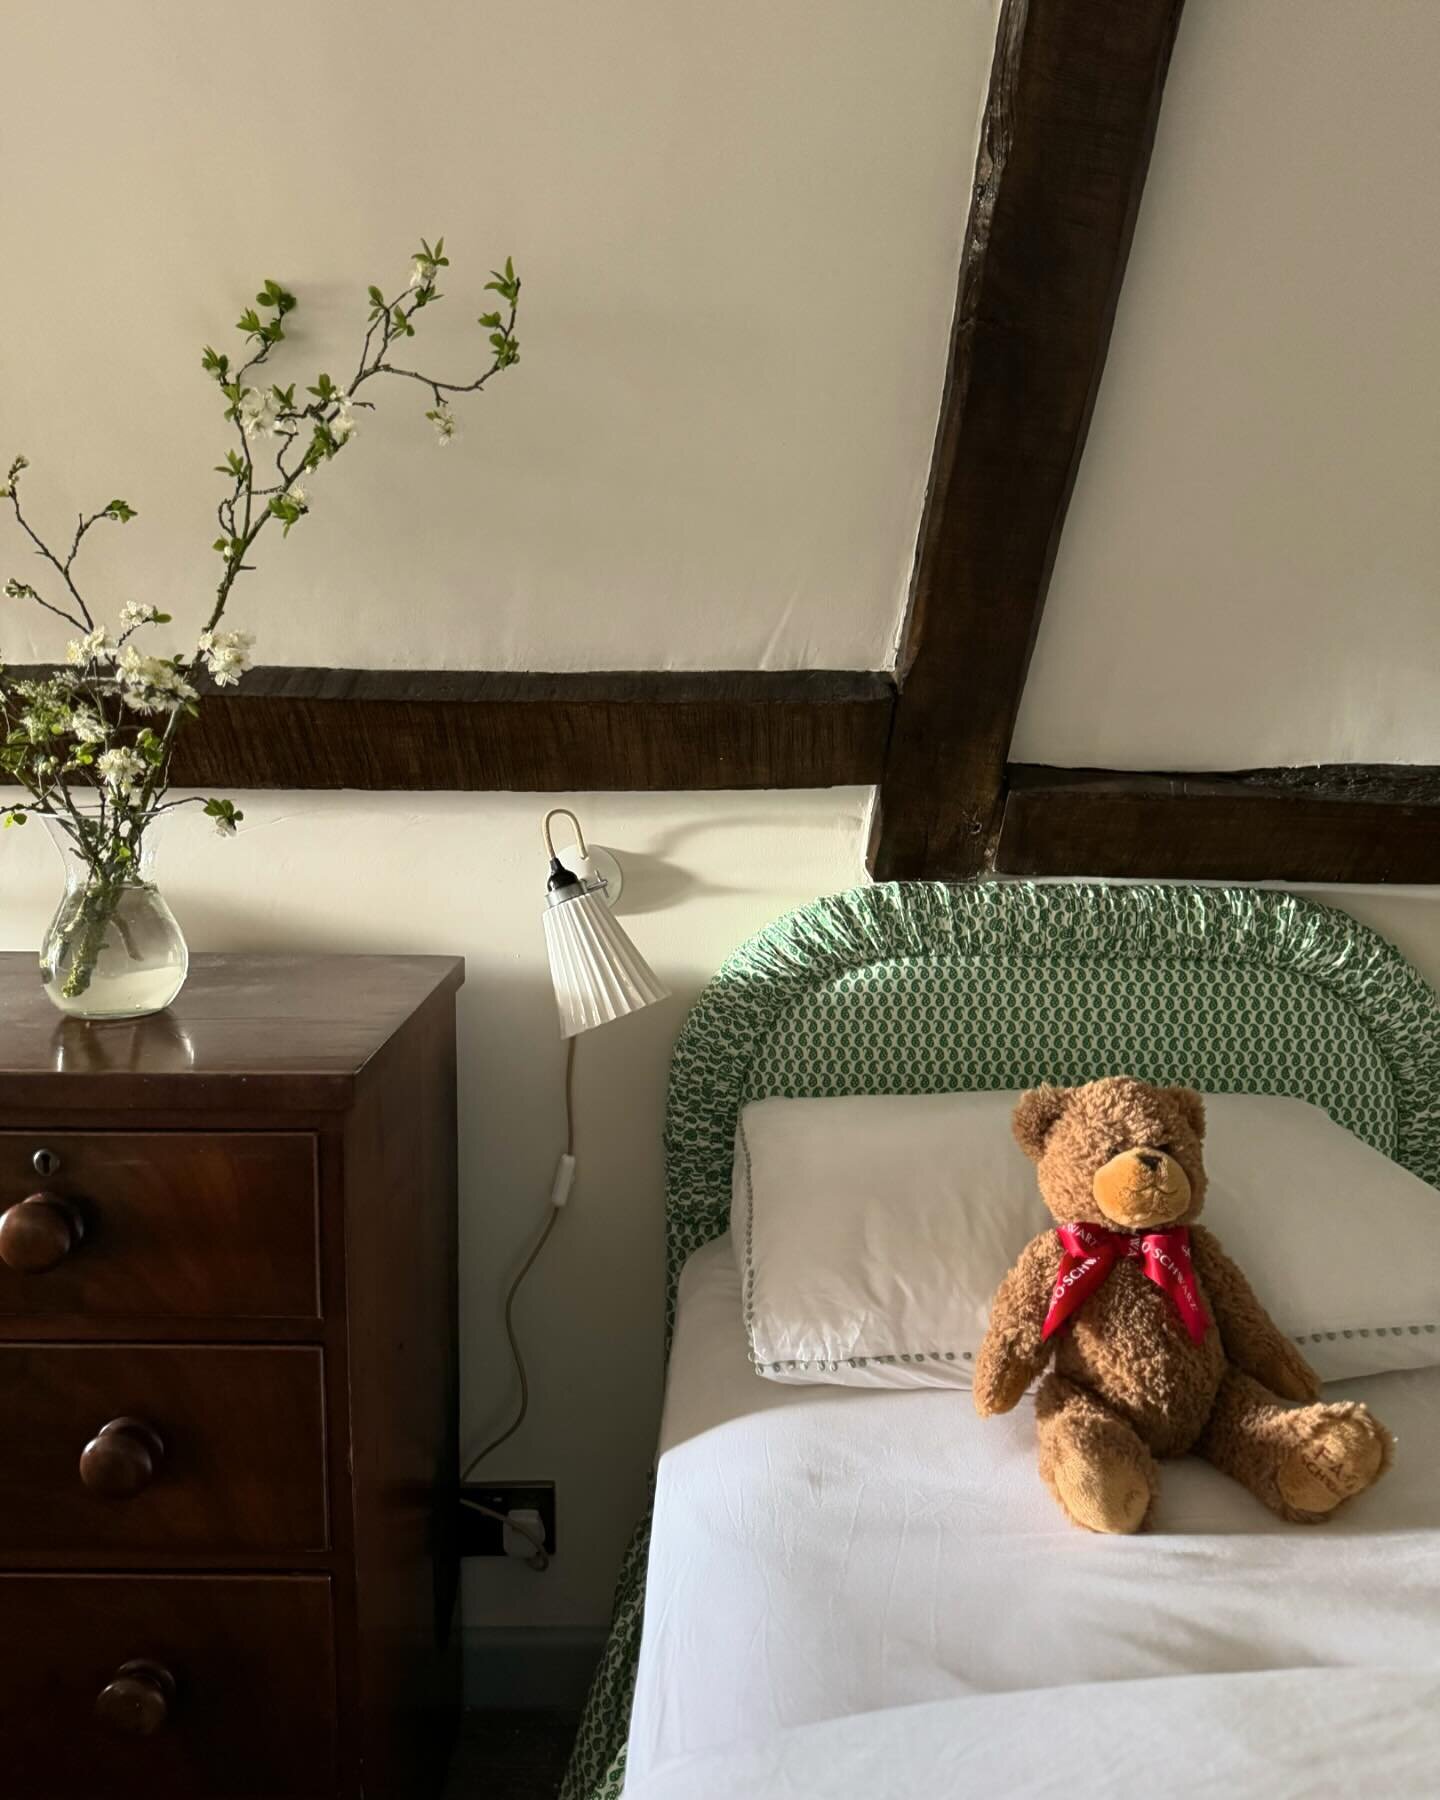 Attic bedroom for Teddy 💚 Prettiest ruched headboards and frilly bed valances in fine linen @howe36bournestreet in the eaves of a very old and beautifully atmospheric Norfolk house #charlottecroftsandco #interiors #countrylife